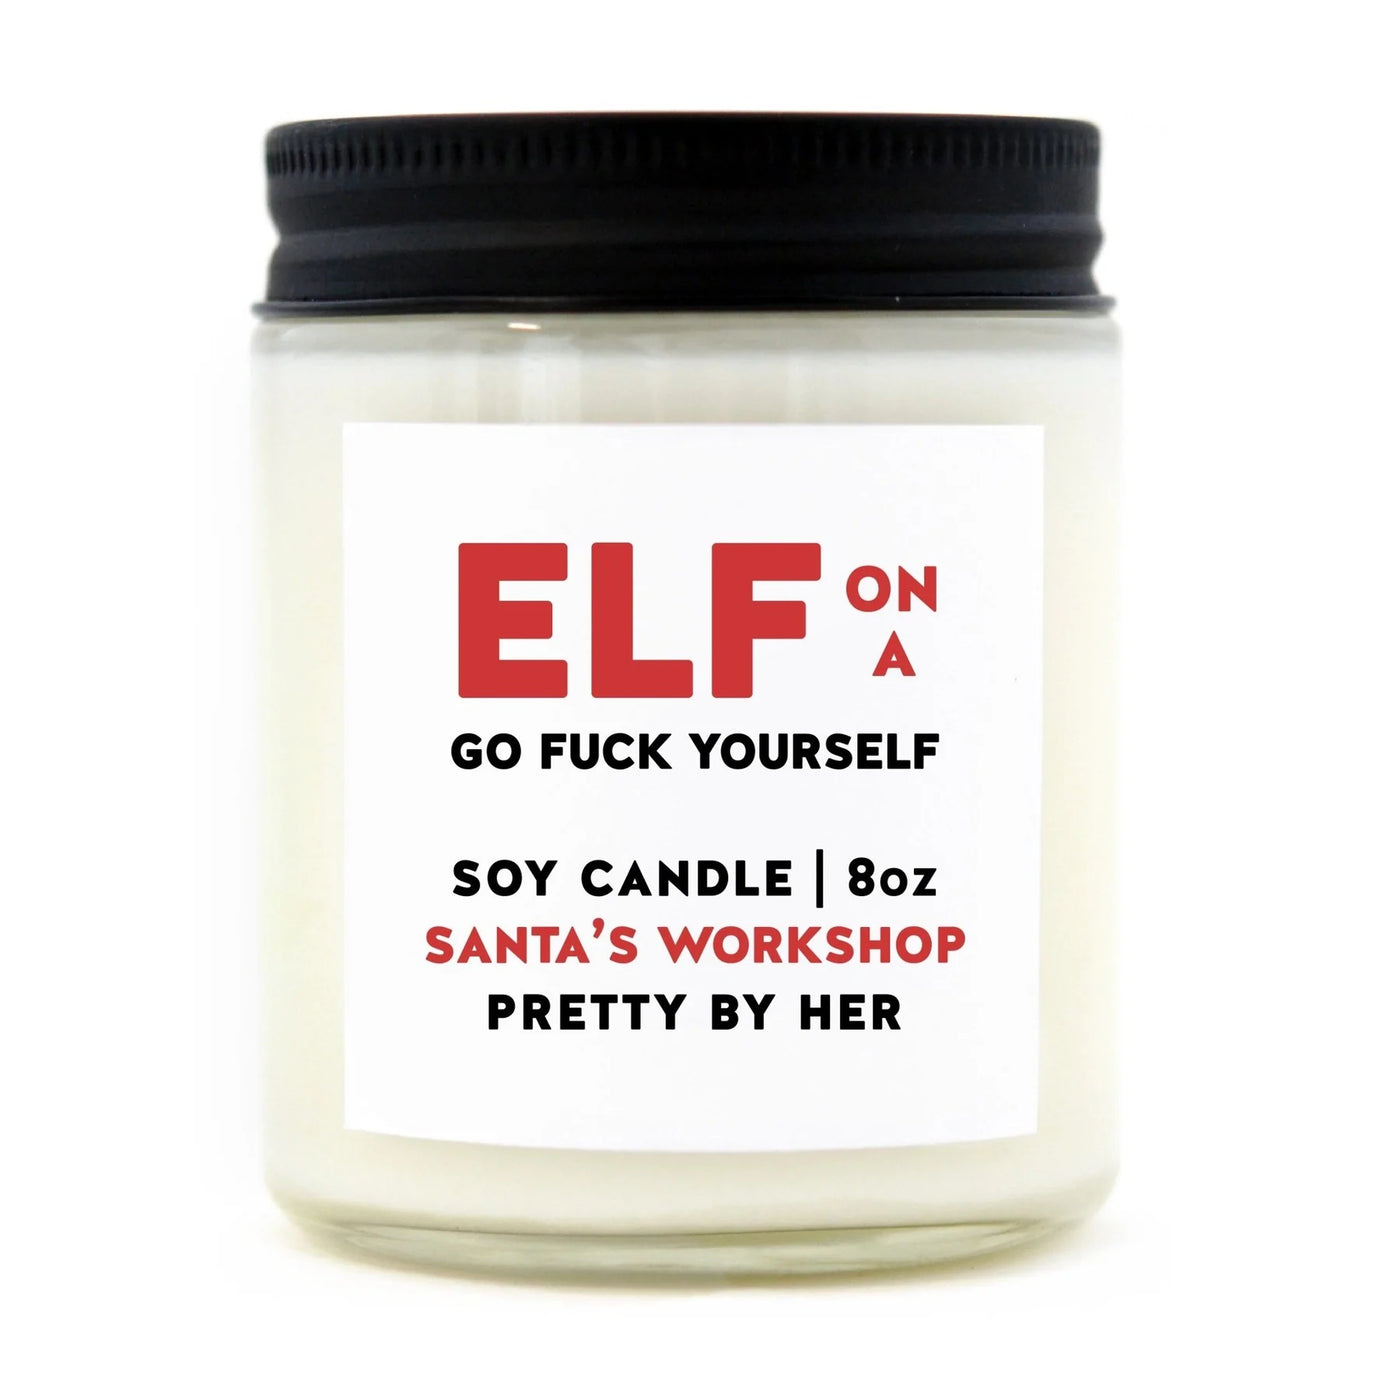 ELF ON A GO FUCK YOURSELF CANDLE